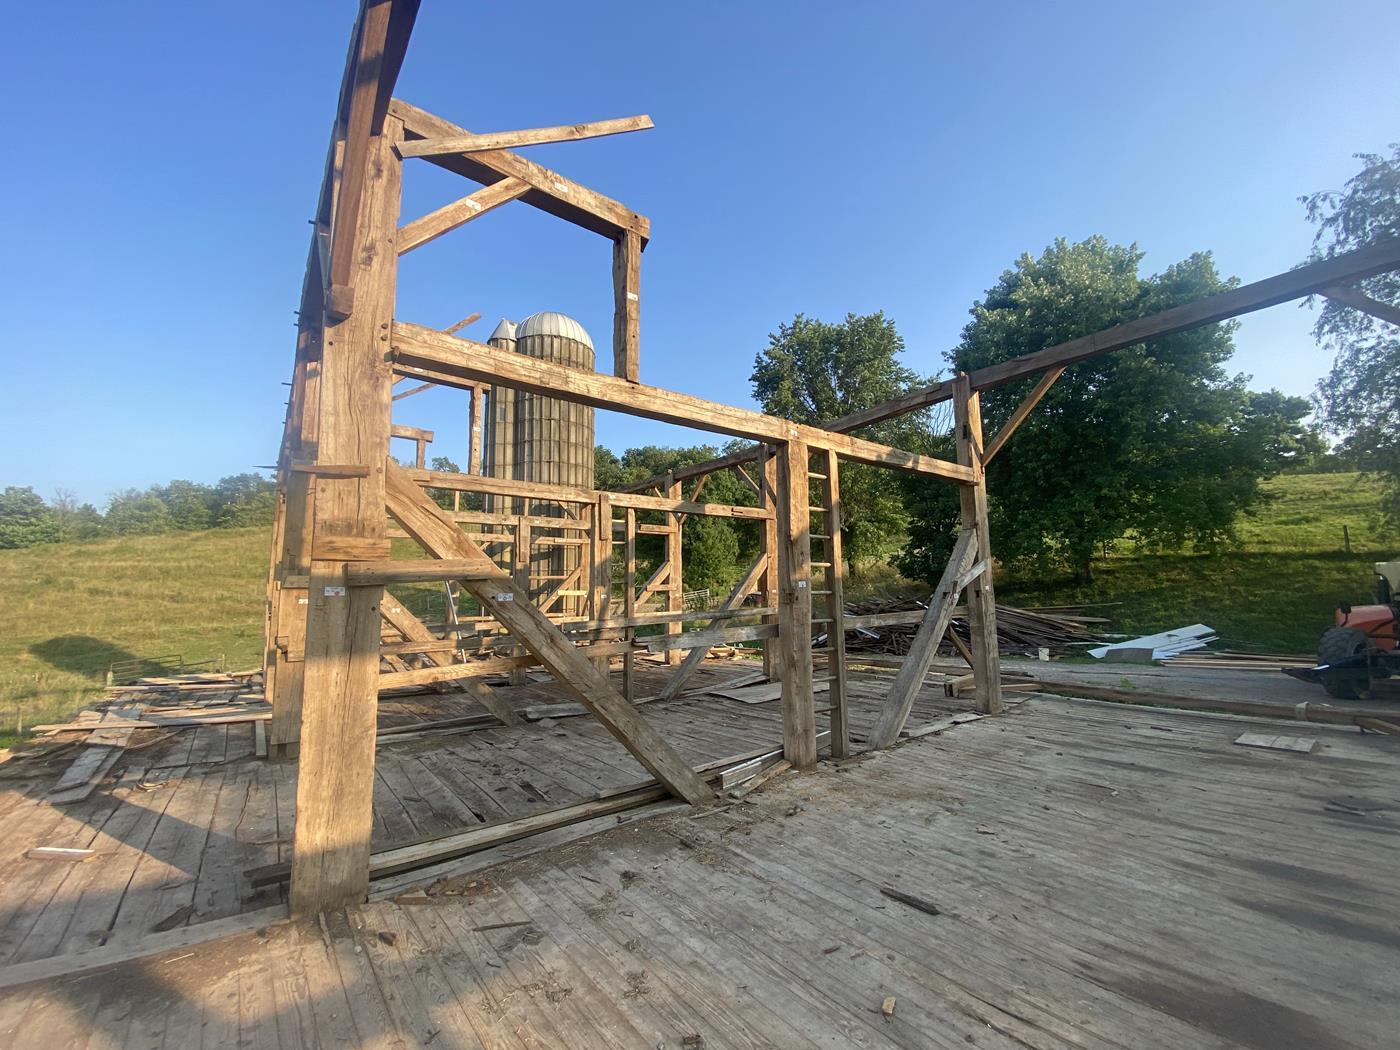 https://www.ohiovalleybarnsalvage.com/images/Beachy Historic Ohio Barn Frame - Your Source For Reclaimed Barn Siding